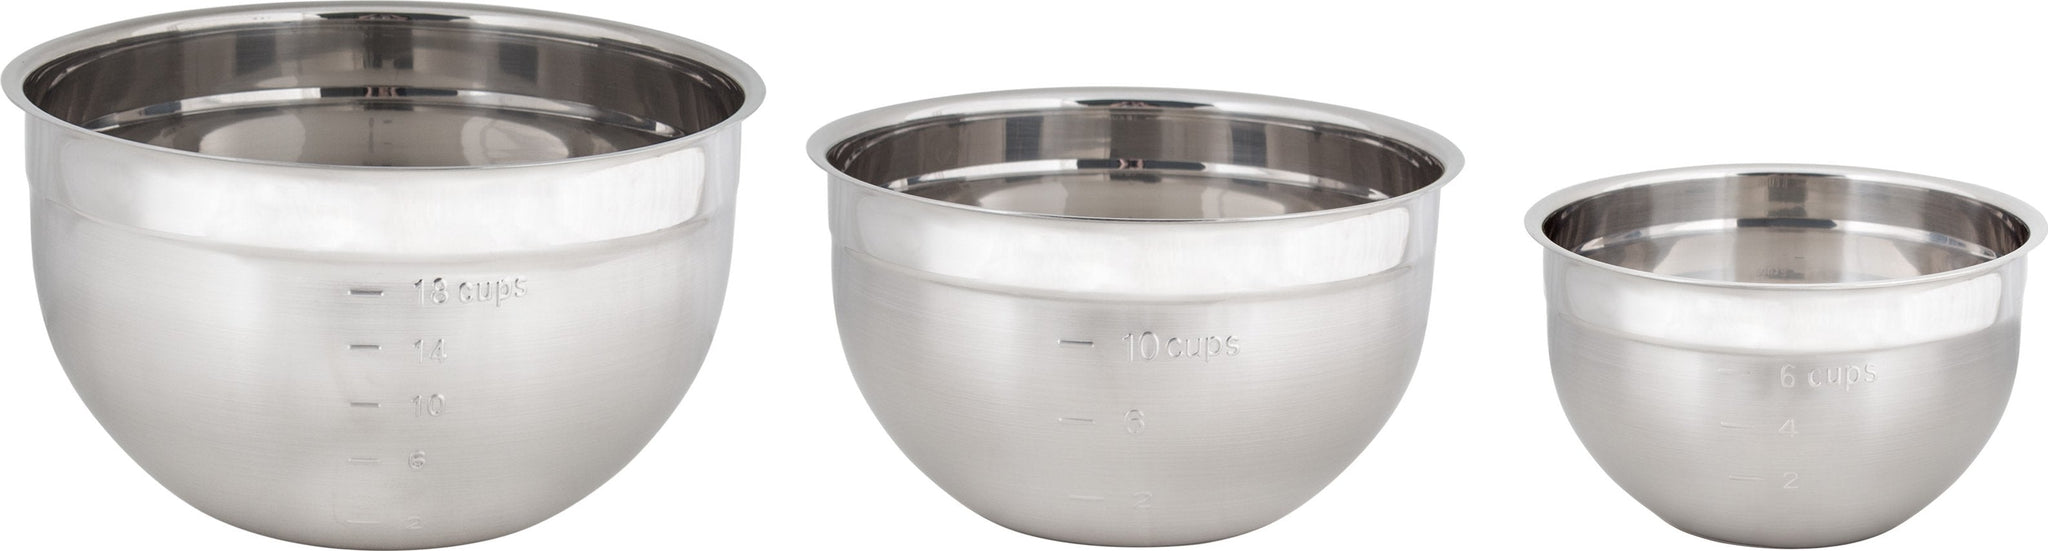 Cuisipro - Set of 3 Stainless Steel Mixing Bowls - 747390